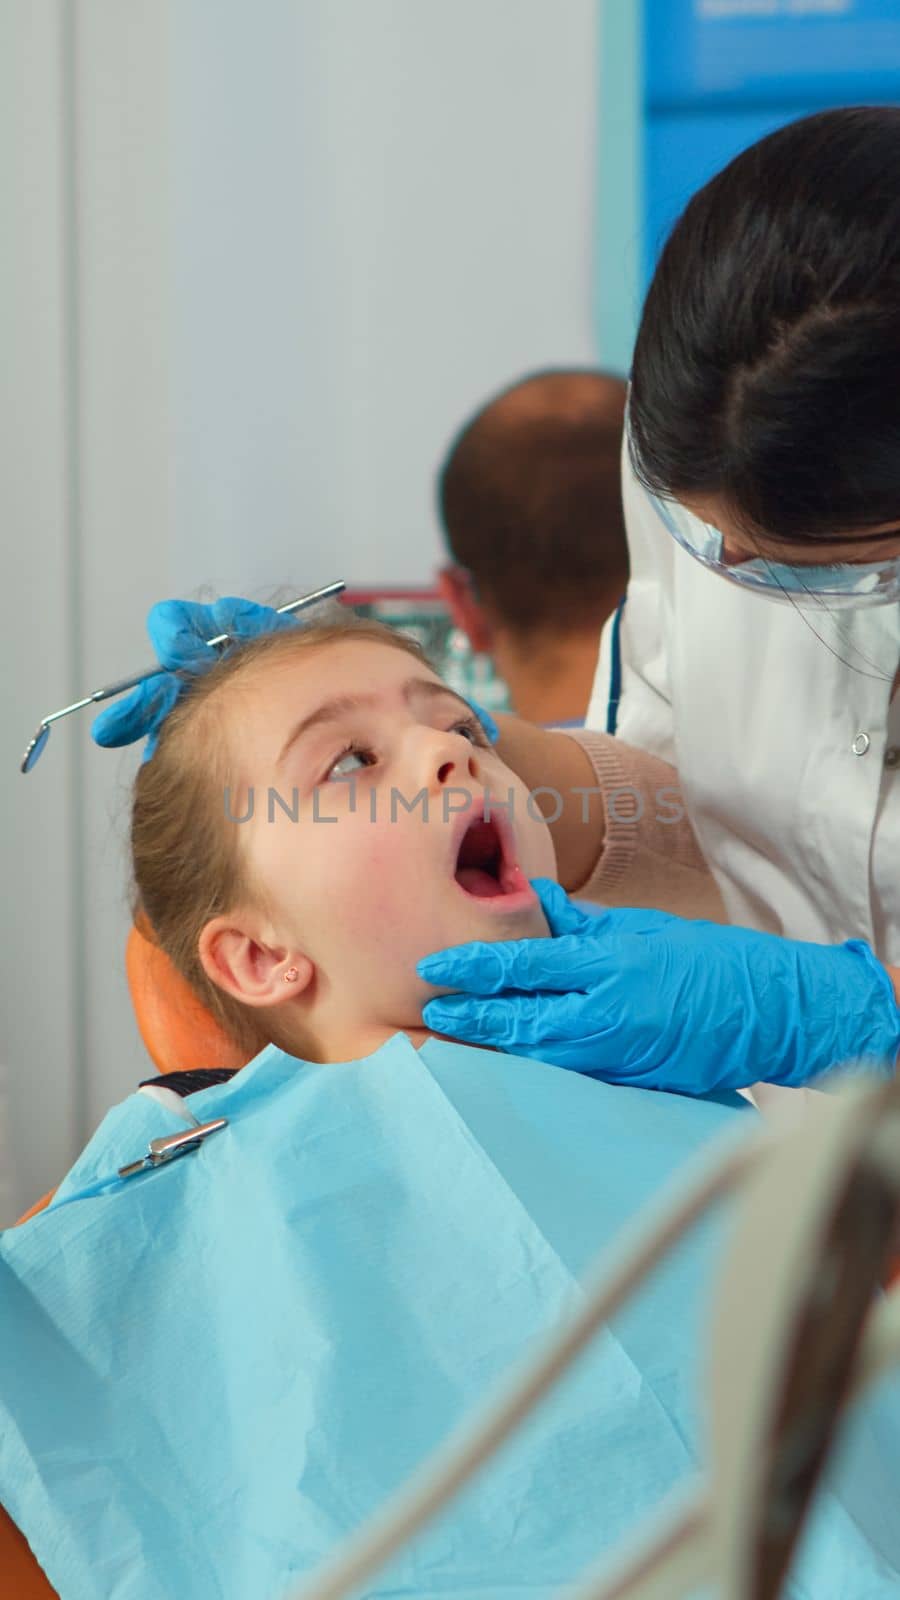 Pediatric dentist with mask treating teeth to little girl patient by DCStudio